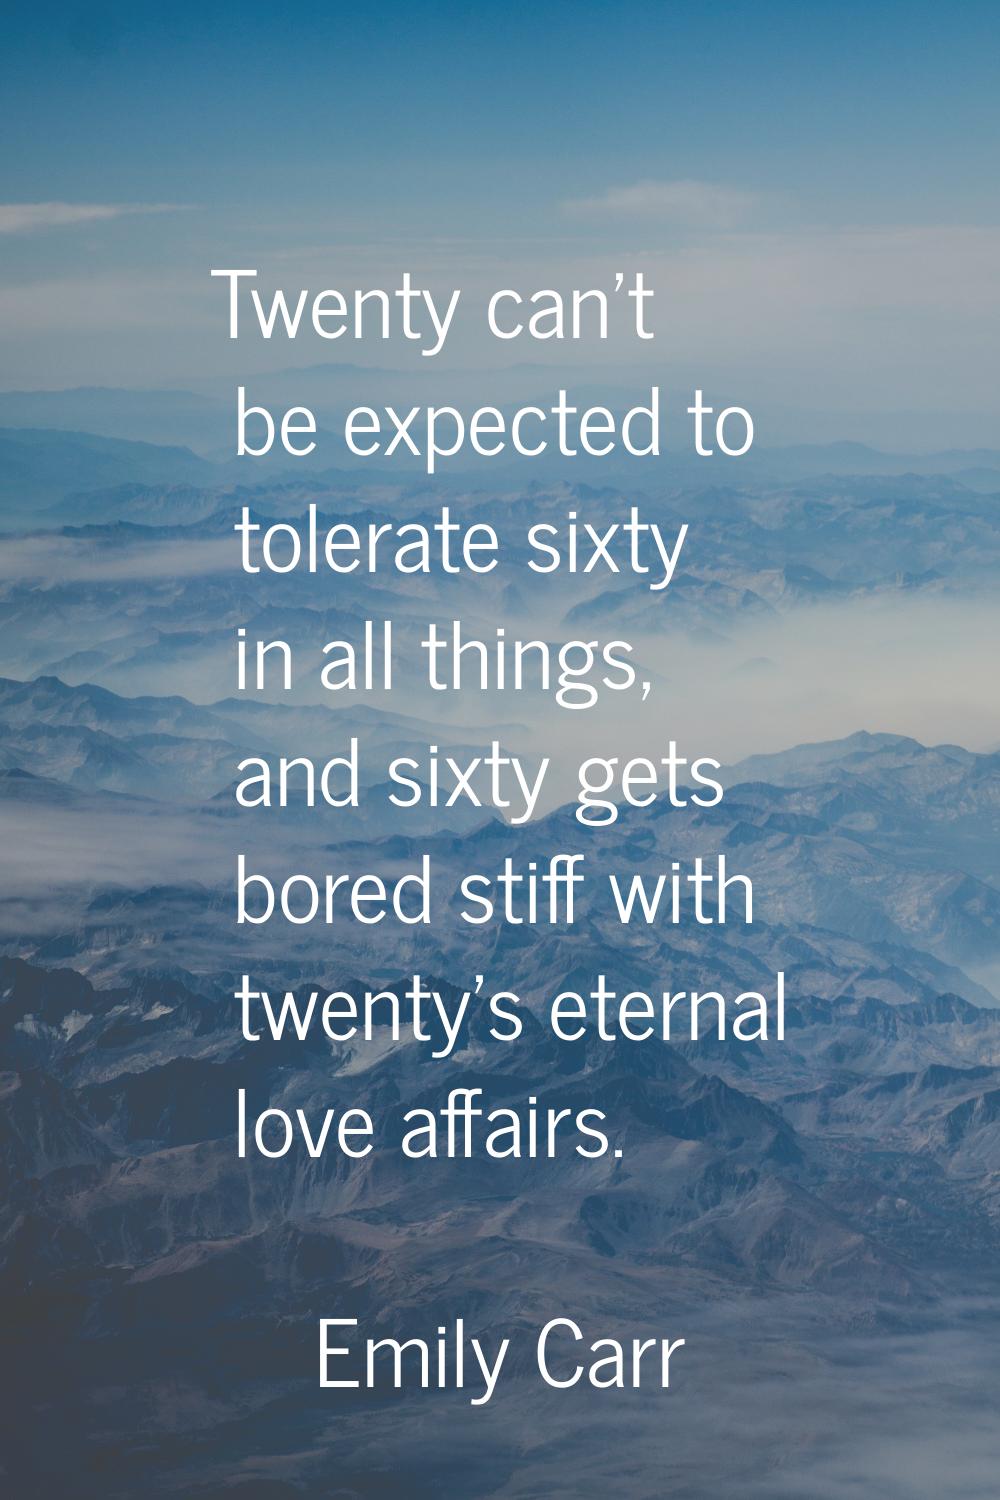 Twenty can't be expected to tolerate sixty in all things, and sixty gets bored stiff with twenty's 